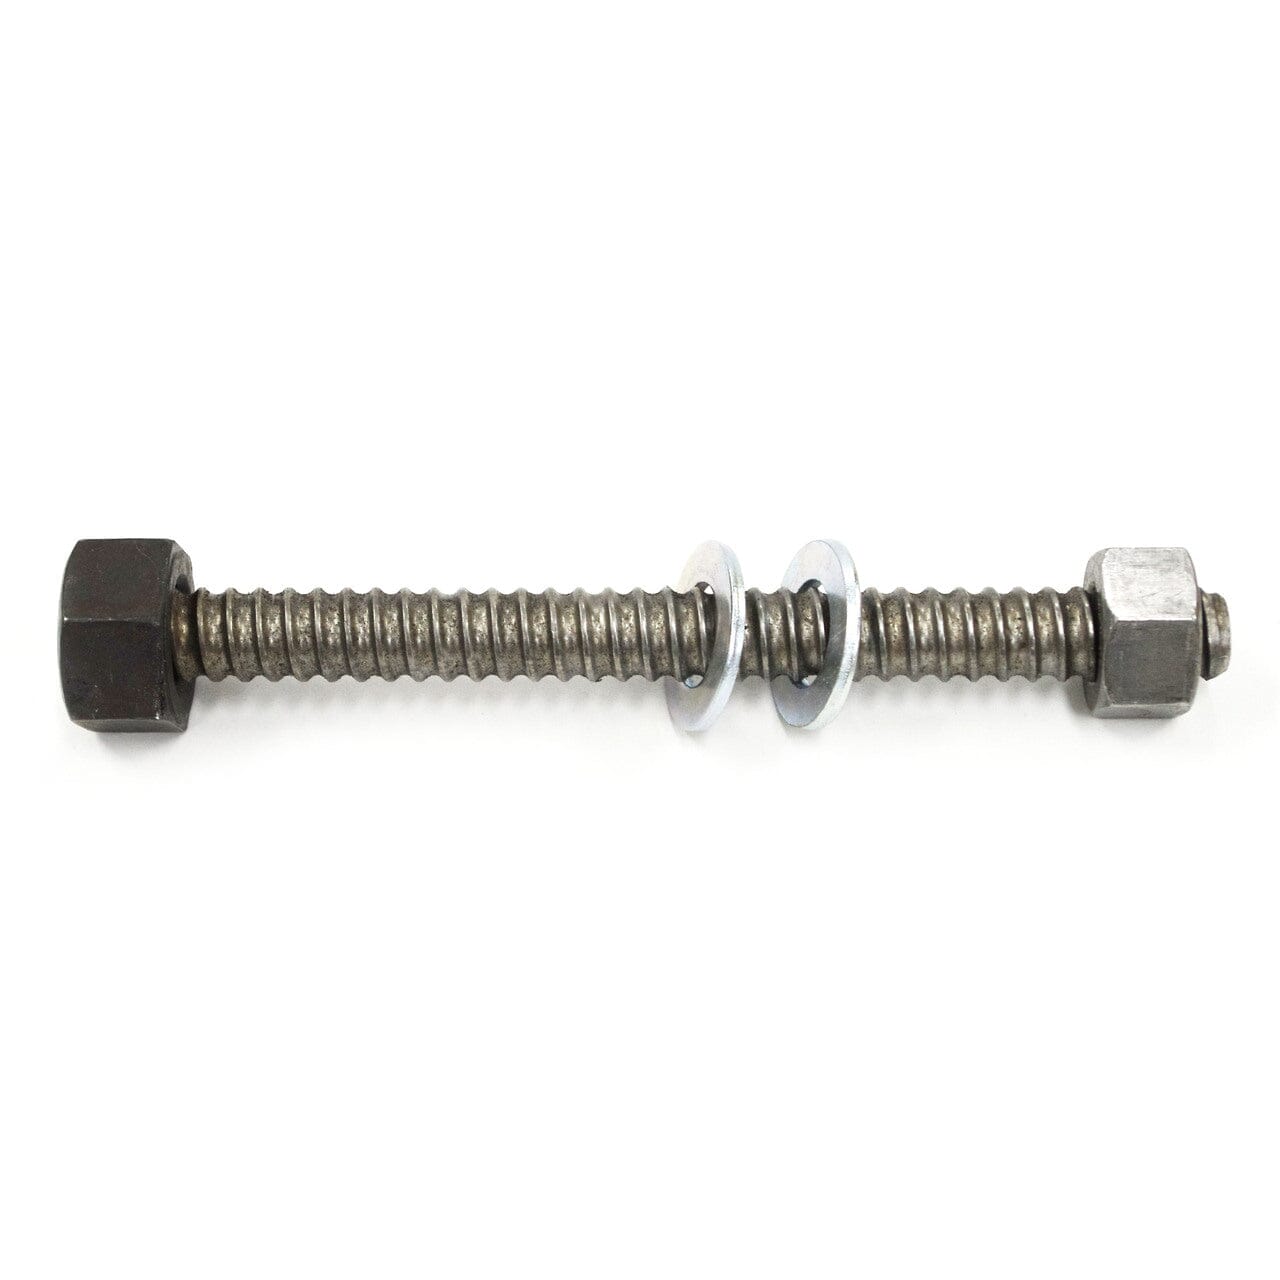 thread bolt with a 1 7/16" Nut welded on one end and a 1 1/4" loose nut on the other